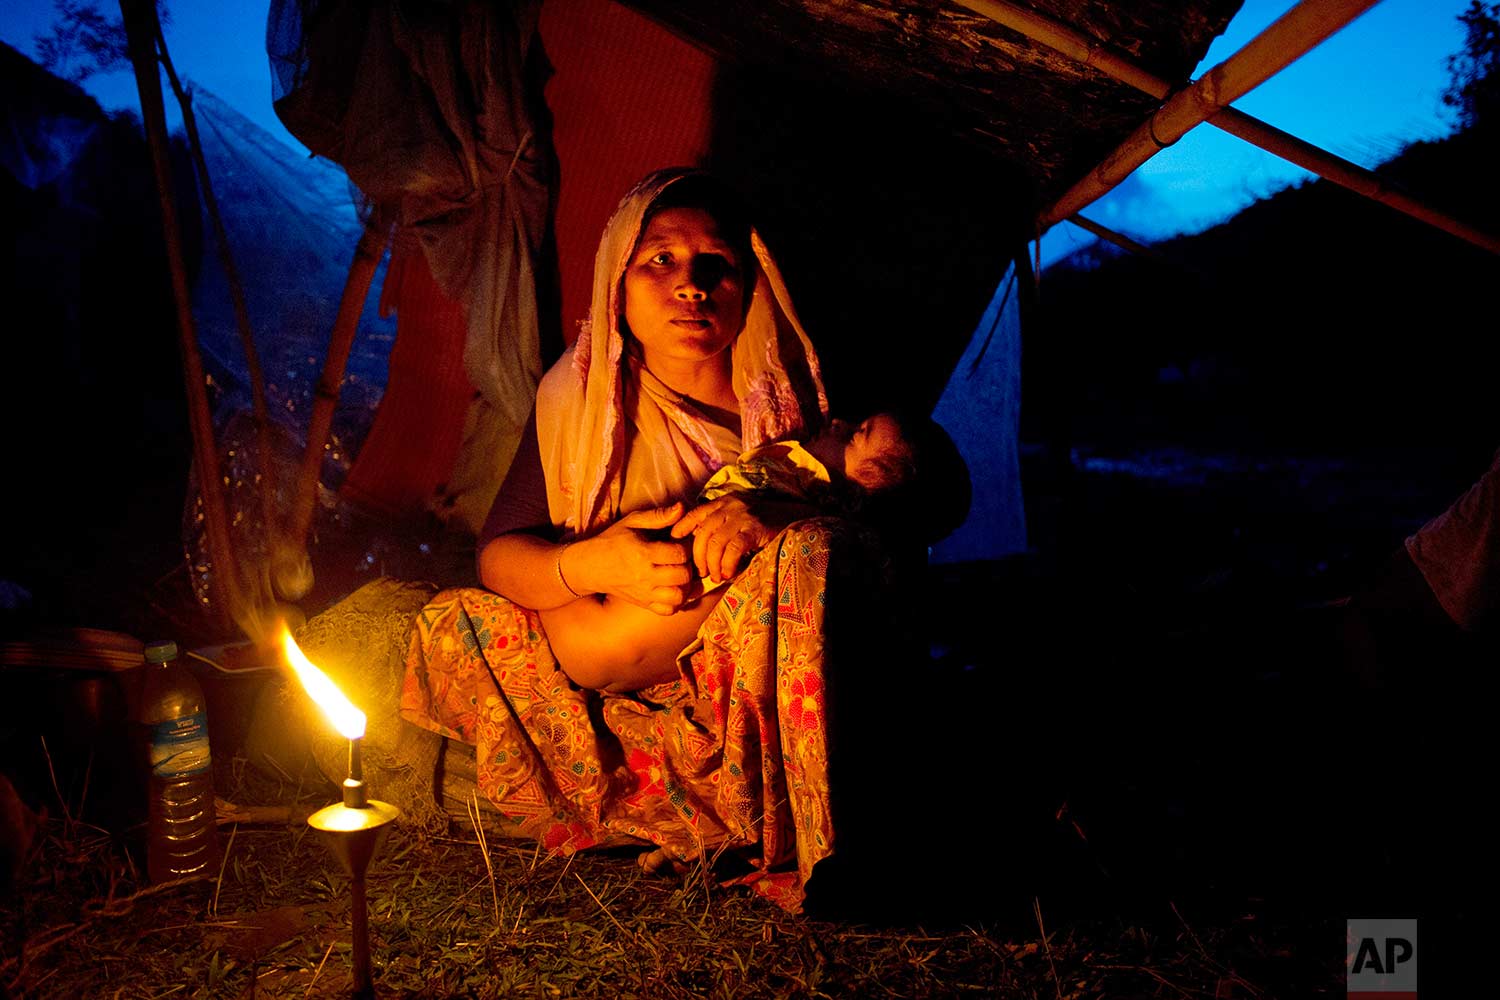  A Rohingya ethnic minority woman cradles her child at a temporary makeshift camp after crossing over from Myanmar into the Bangladesh side of the border, near Cox's Bazar's Gundum area, Saturday, Sept. 2, 2017. U.N. spokesman Stephane Dujarric told reporters at U.N. headquarters on Friday that while many of the 270,000 Rohingyas who have fled violence in Rakhine state in the past two weeks initially arrived in Bangladesh by land, more are now making the journey by boat. (AP Photo/Bernat Armangue) 